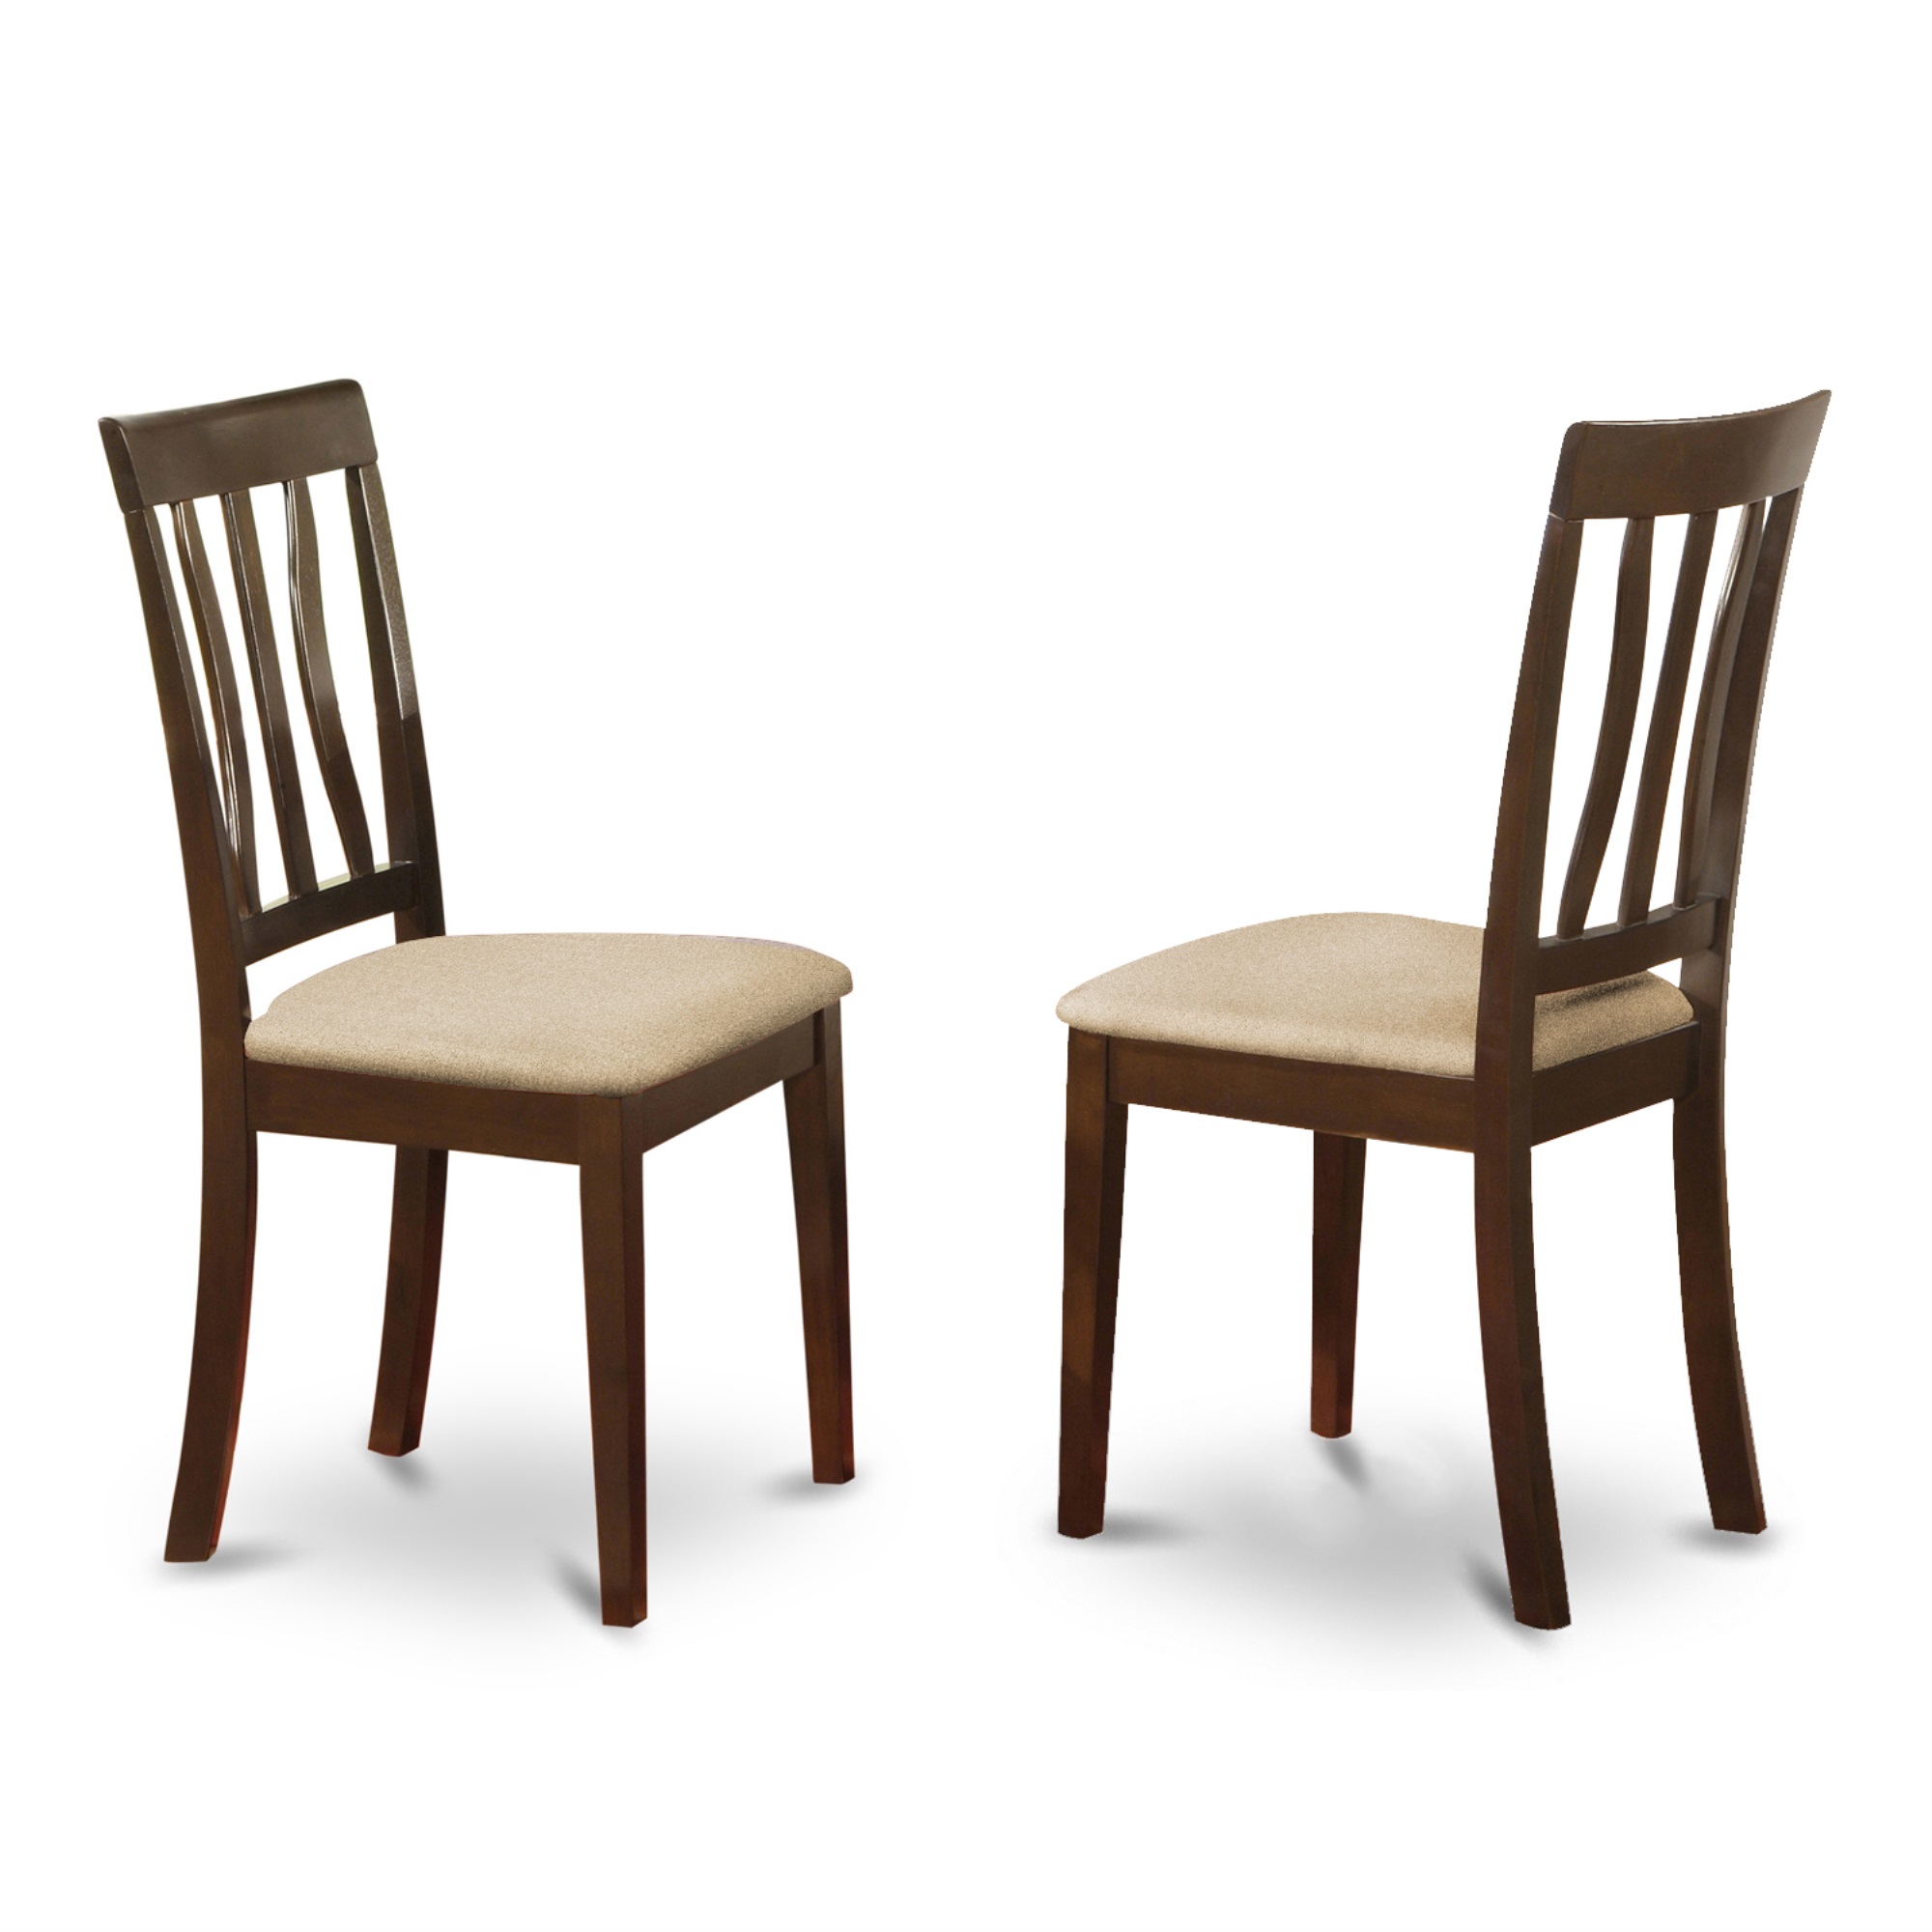 East West Furniture Set of 2 Chairs ANC-CAP-C Antique dining room chair for kitchen With Cushion Seat in Cappuccino Finish